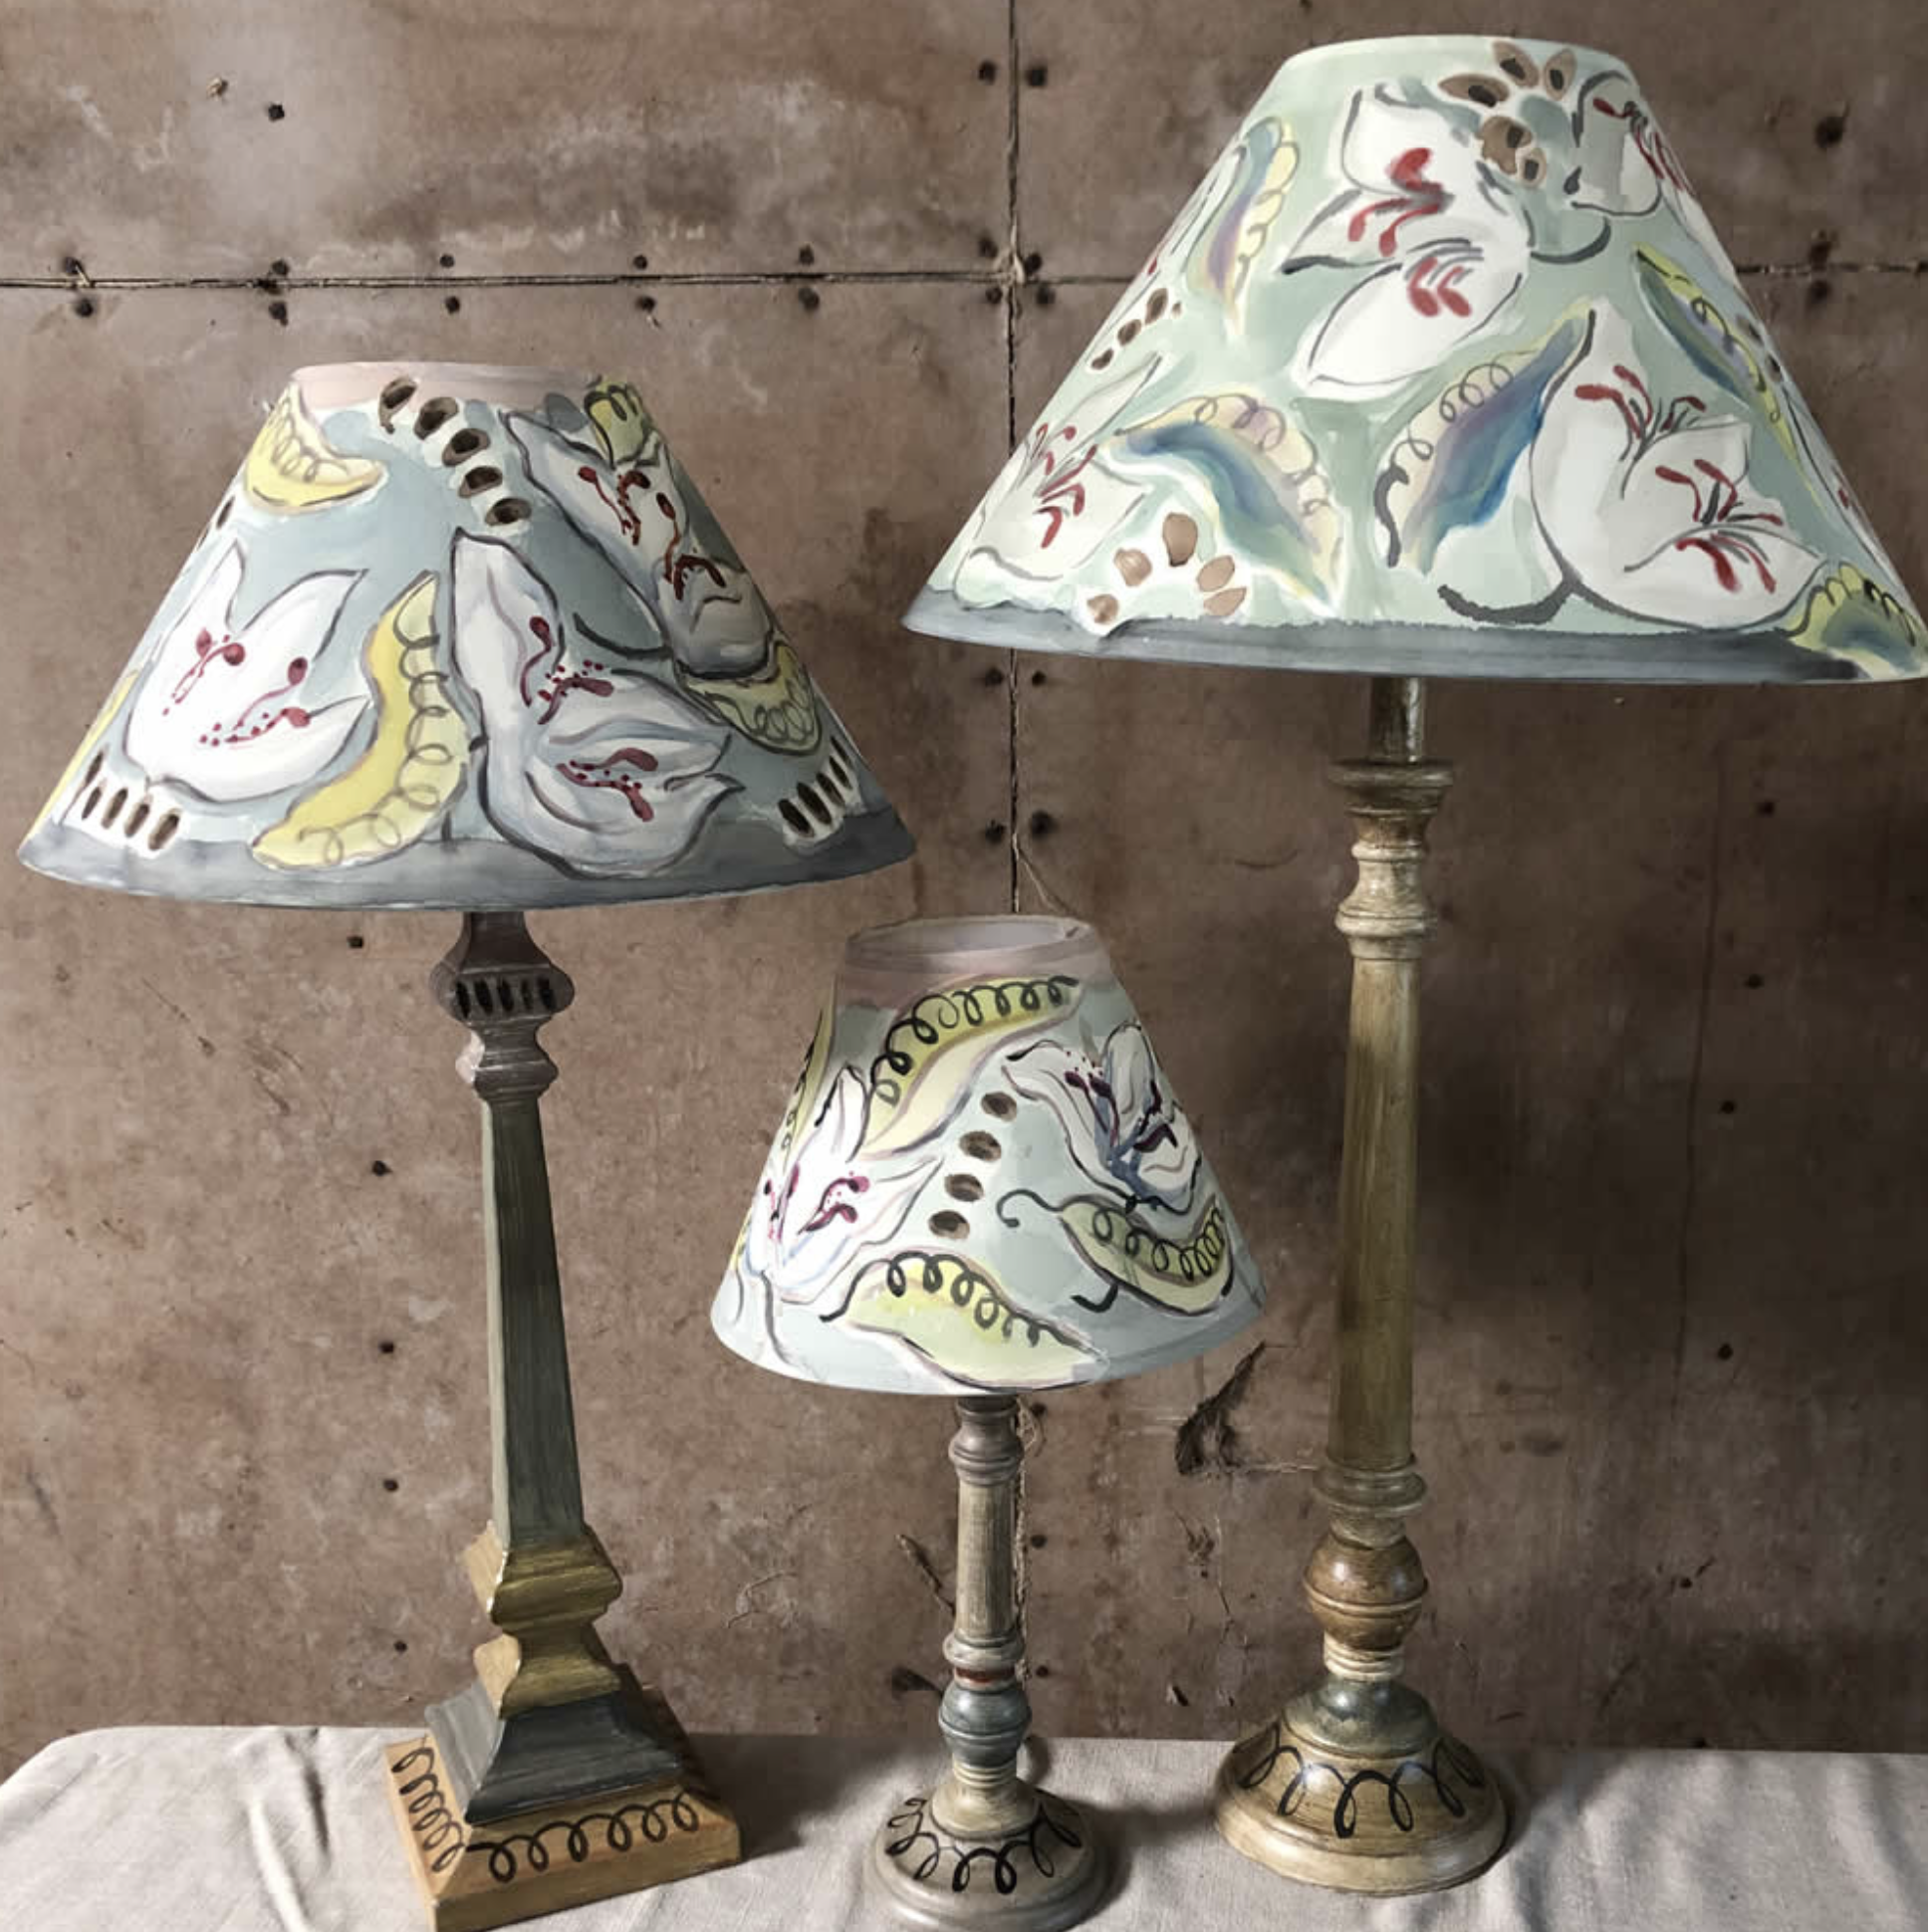 Bloomsbury Revisited lampshades